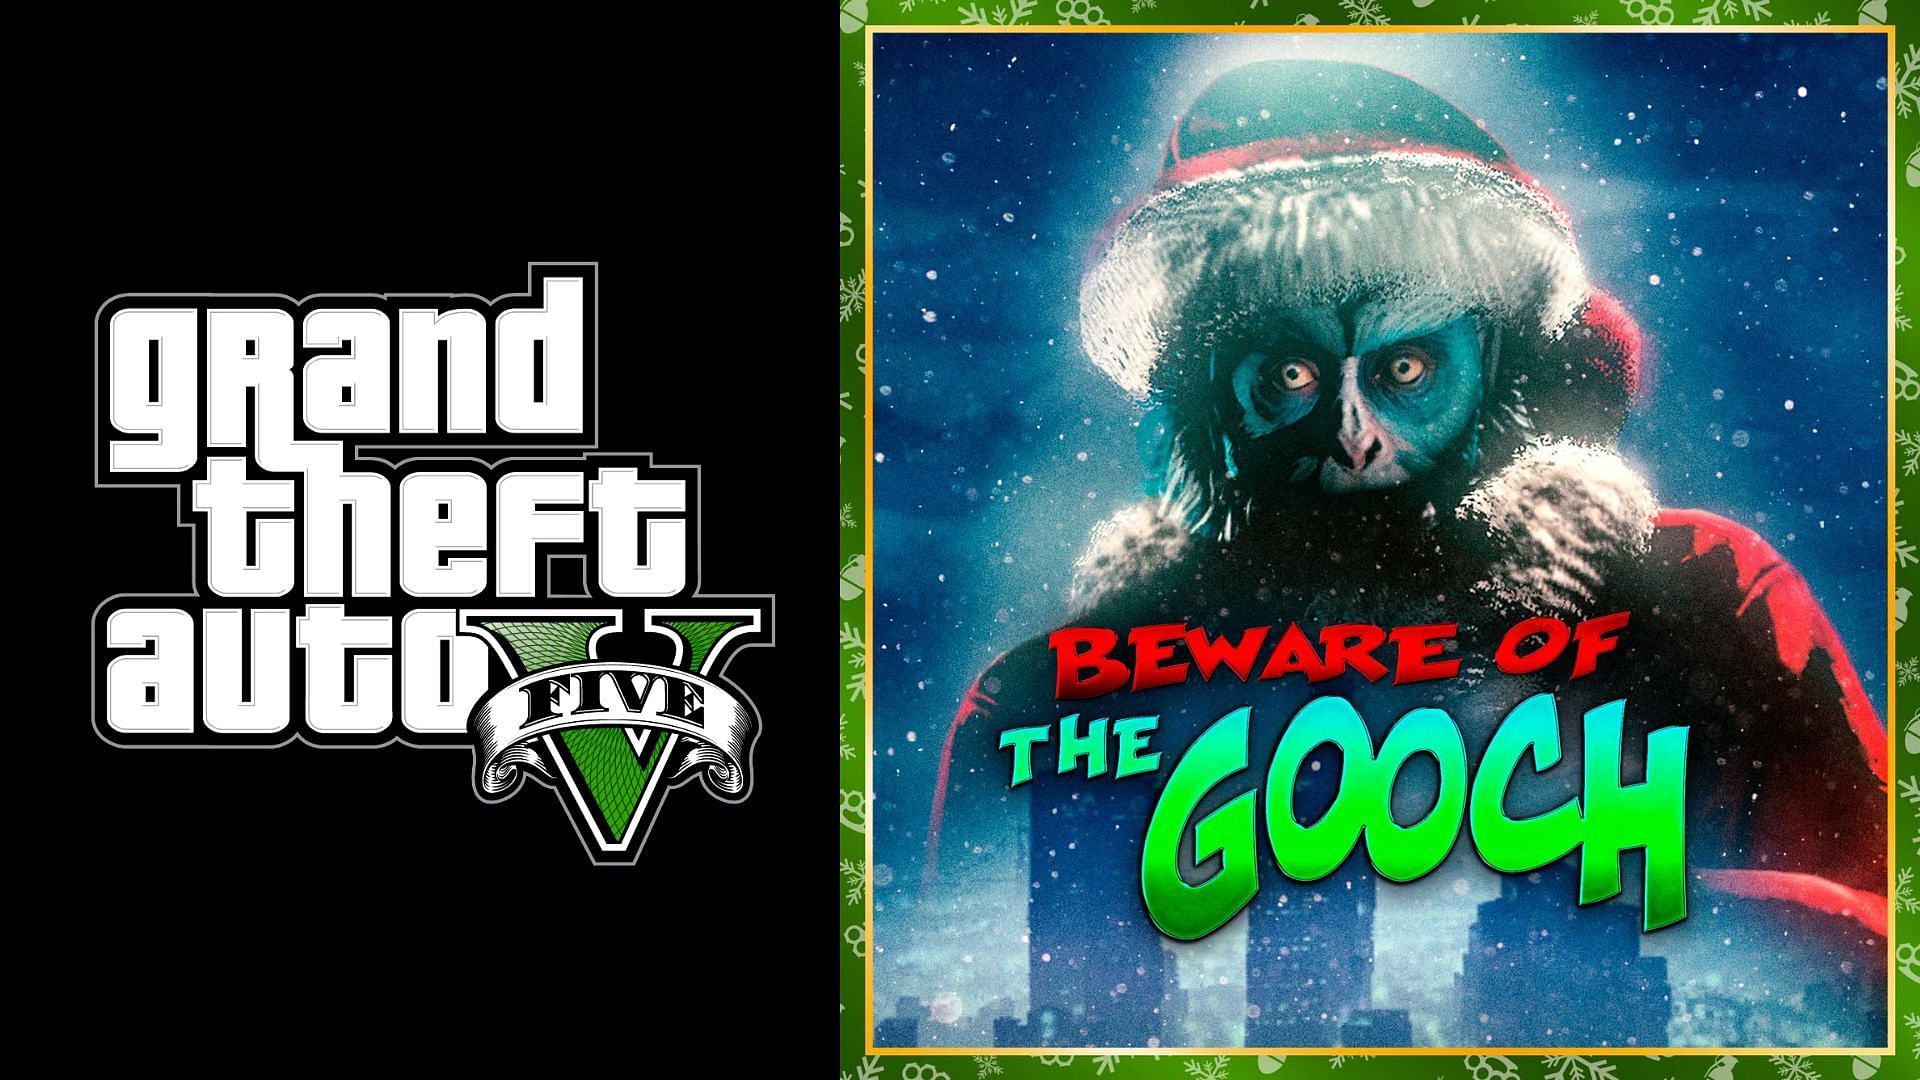 How To Spawn The Gooch In Gta 5s Online Mode